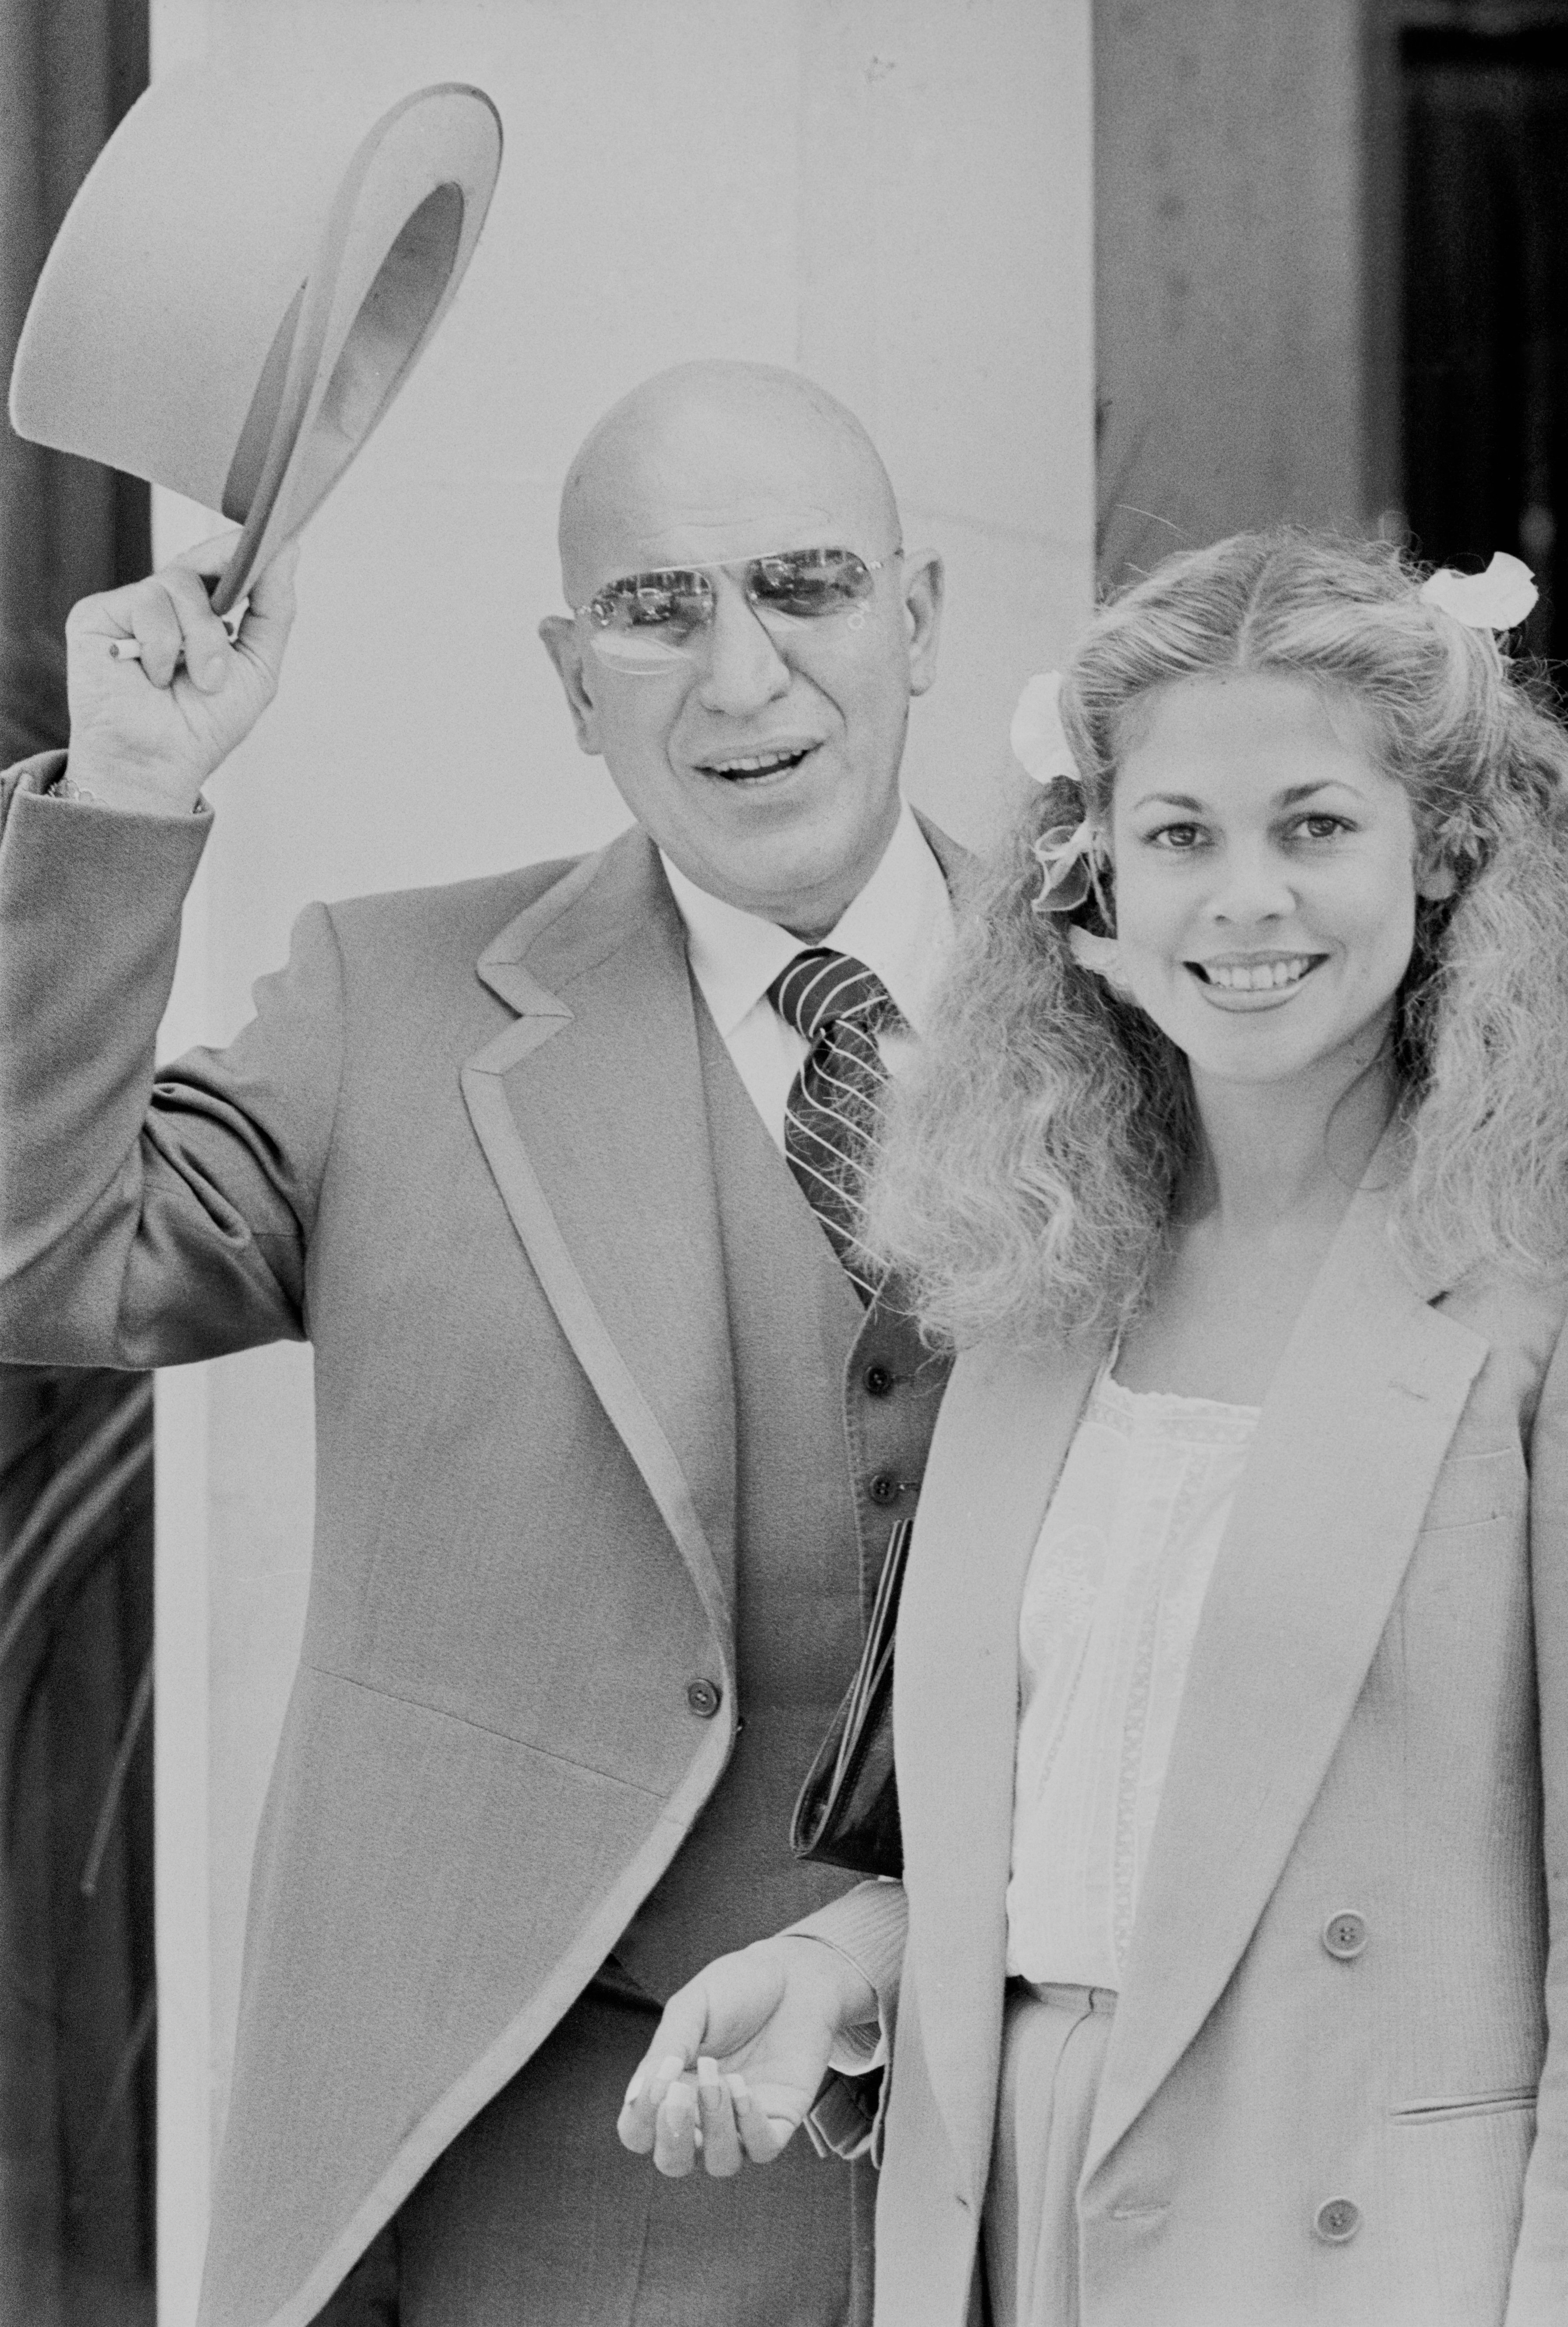 Telly Savalas with girlfriend Sally Adams in the UK on June 20, 1977 | Photo: Getty Images